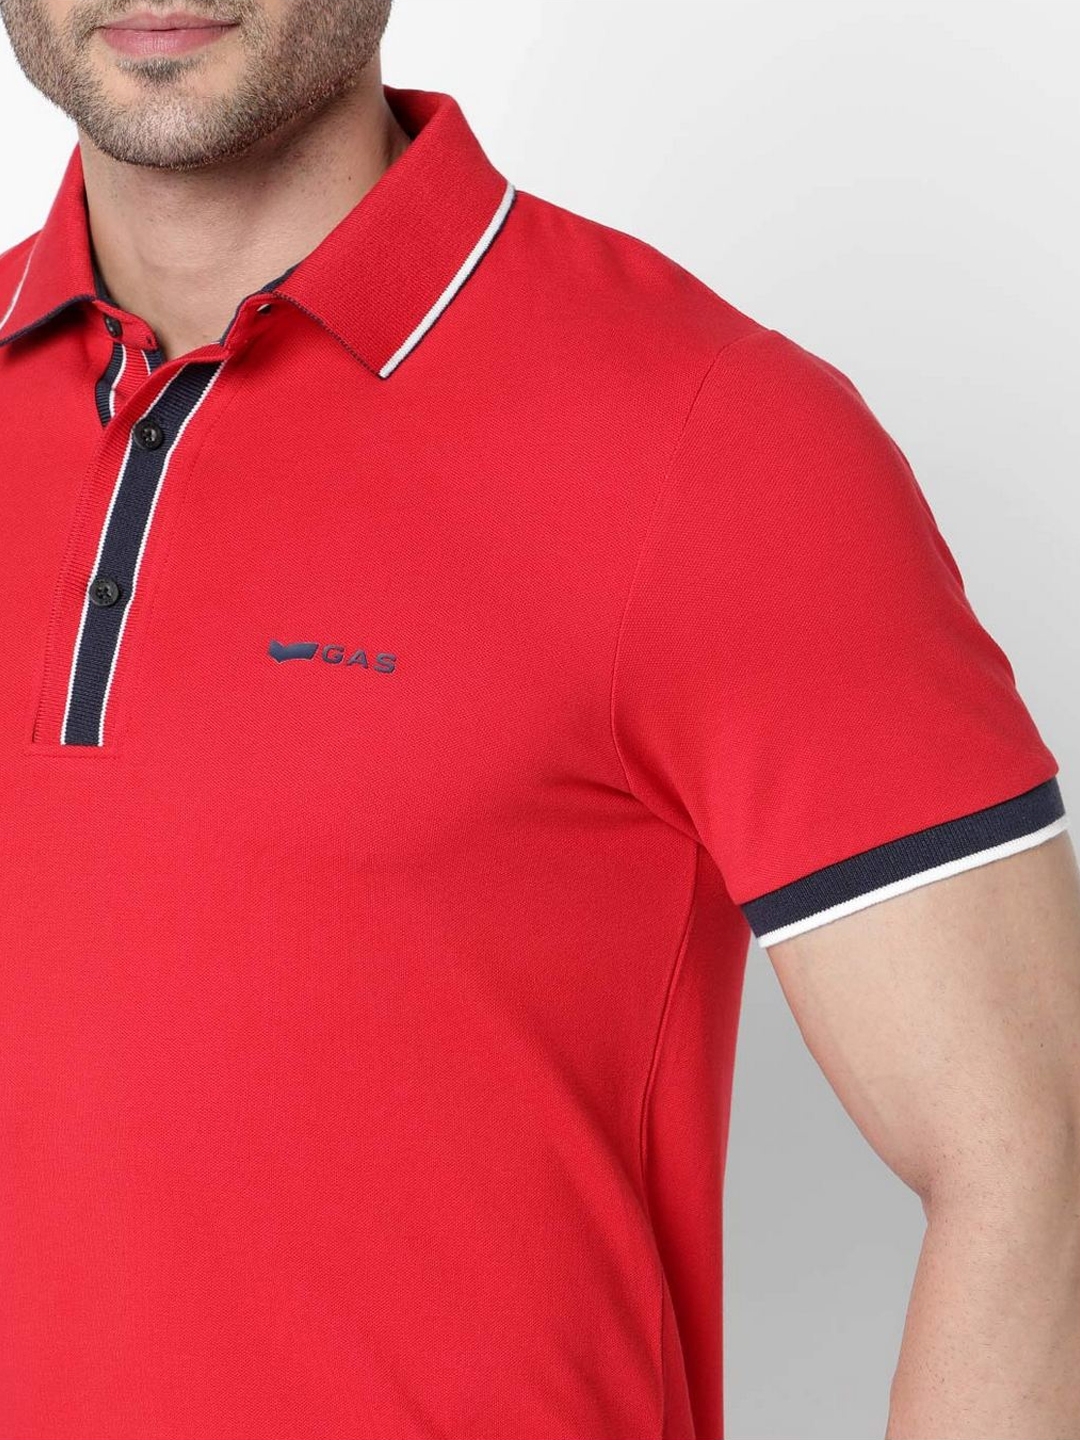 AGAP Solid Red Slim Fit Polo T-shirt